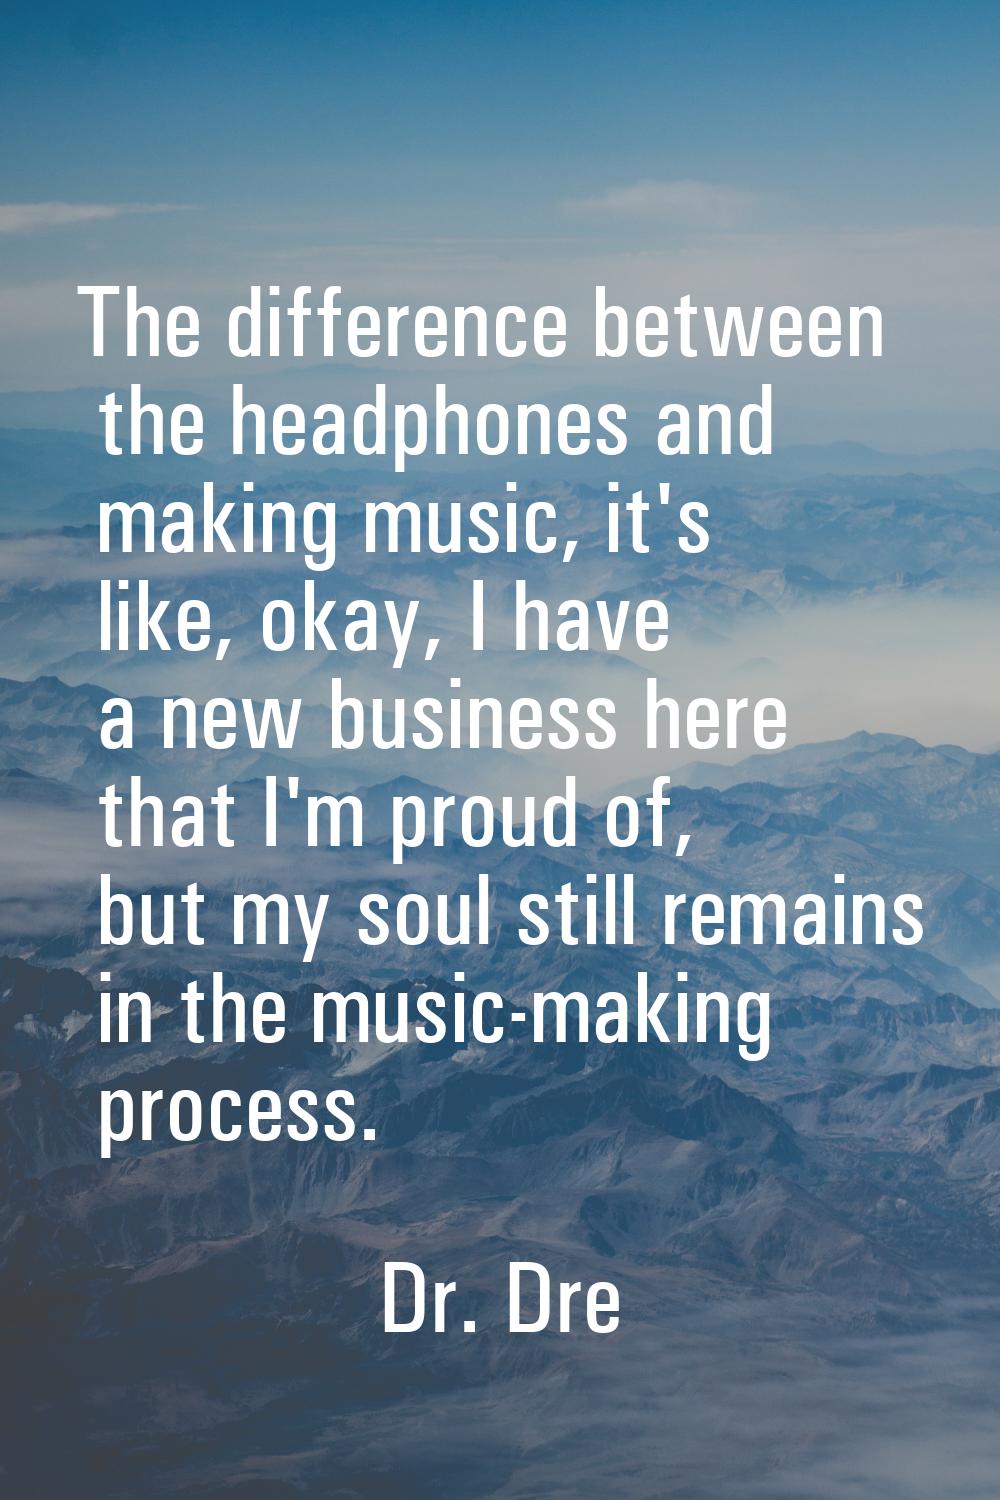 The difference between the headphones and making music, it's like, okay, I have a new business here